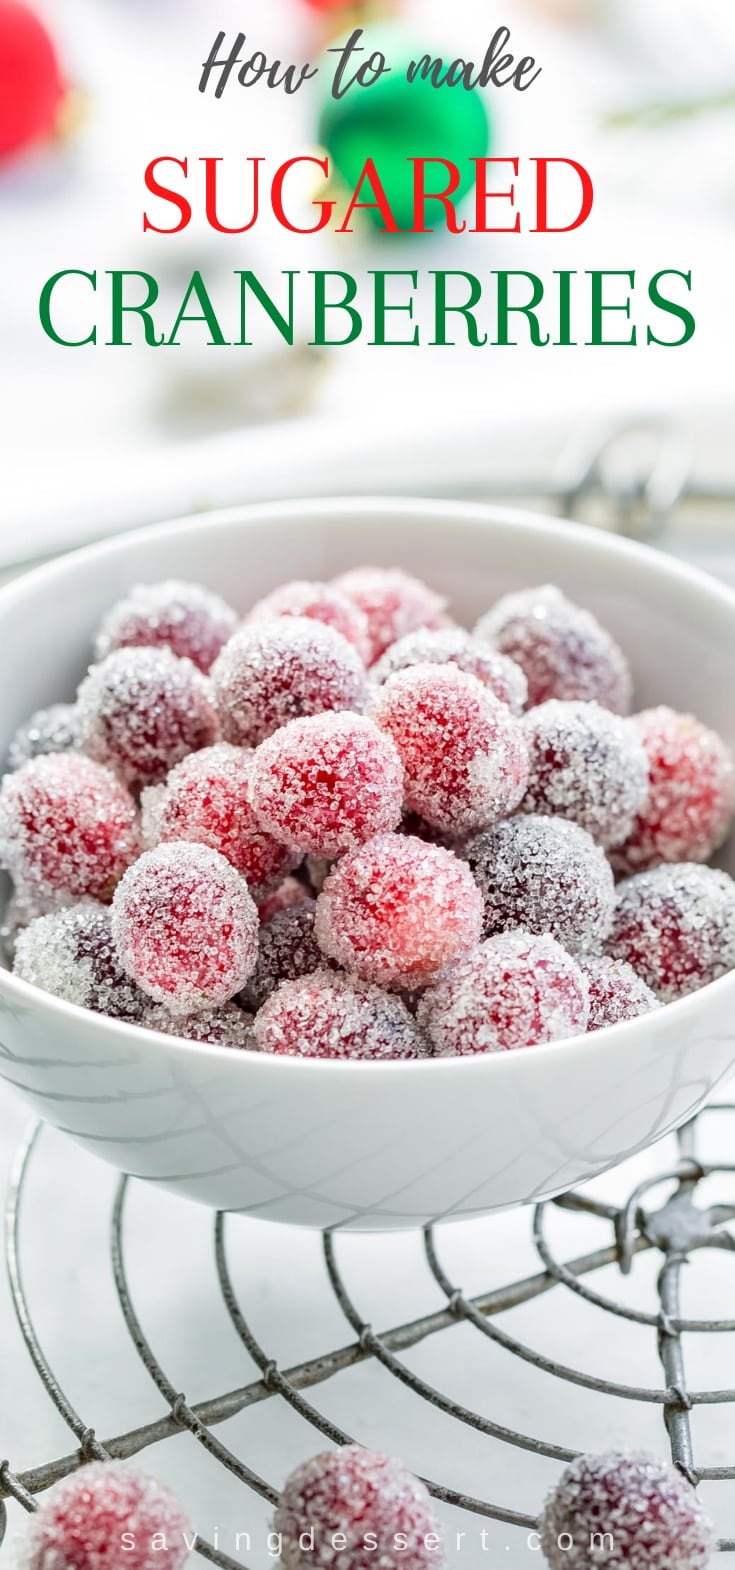 A bowl of sugared cranberries on a cooling rack